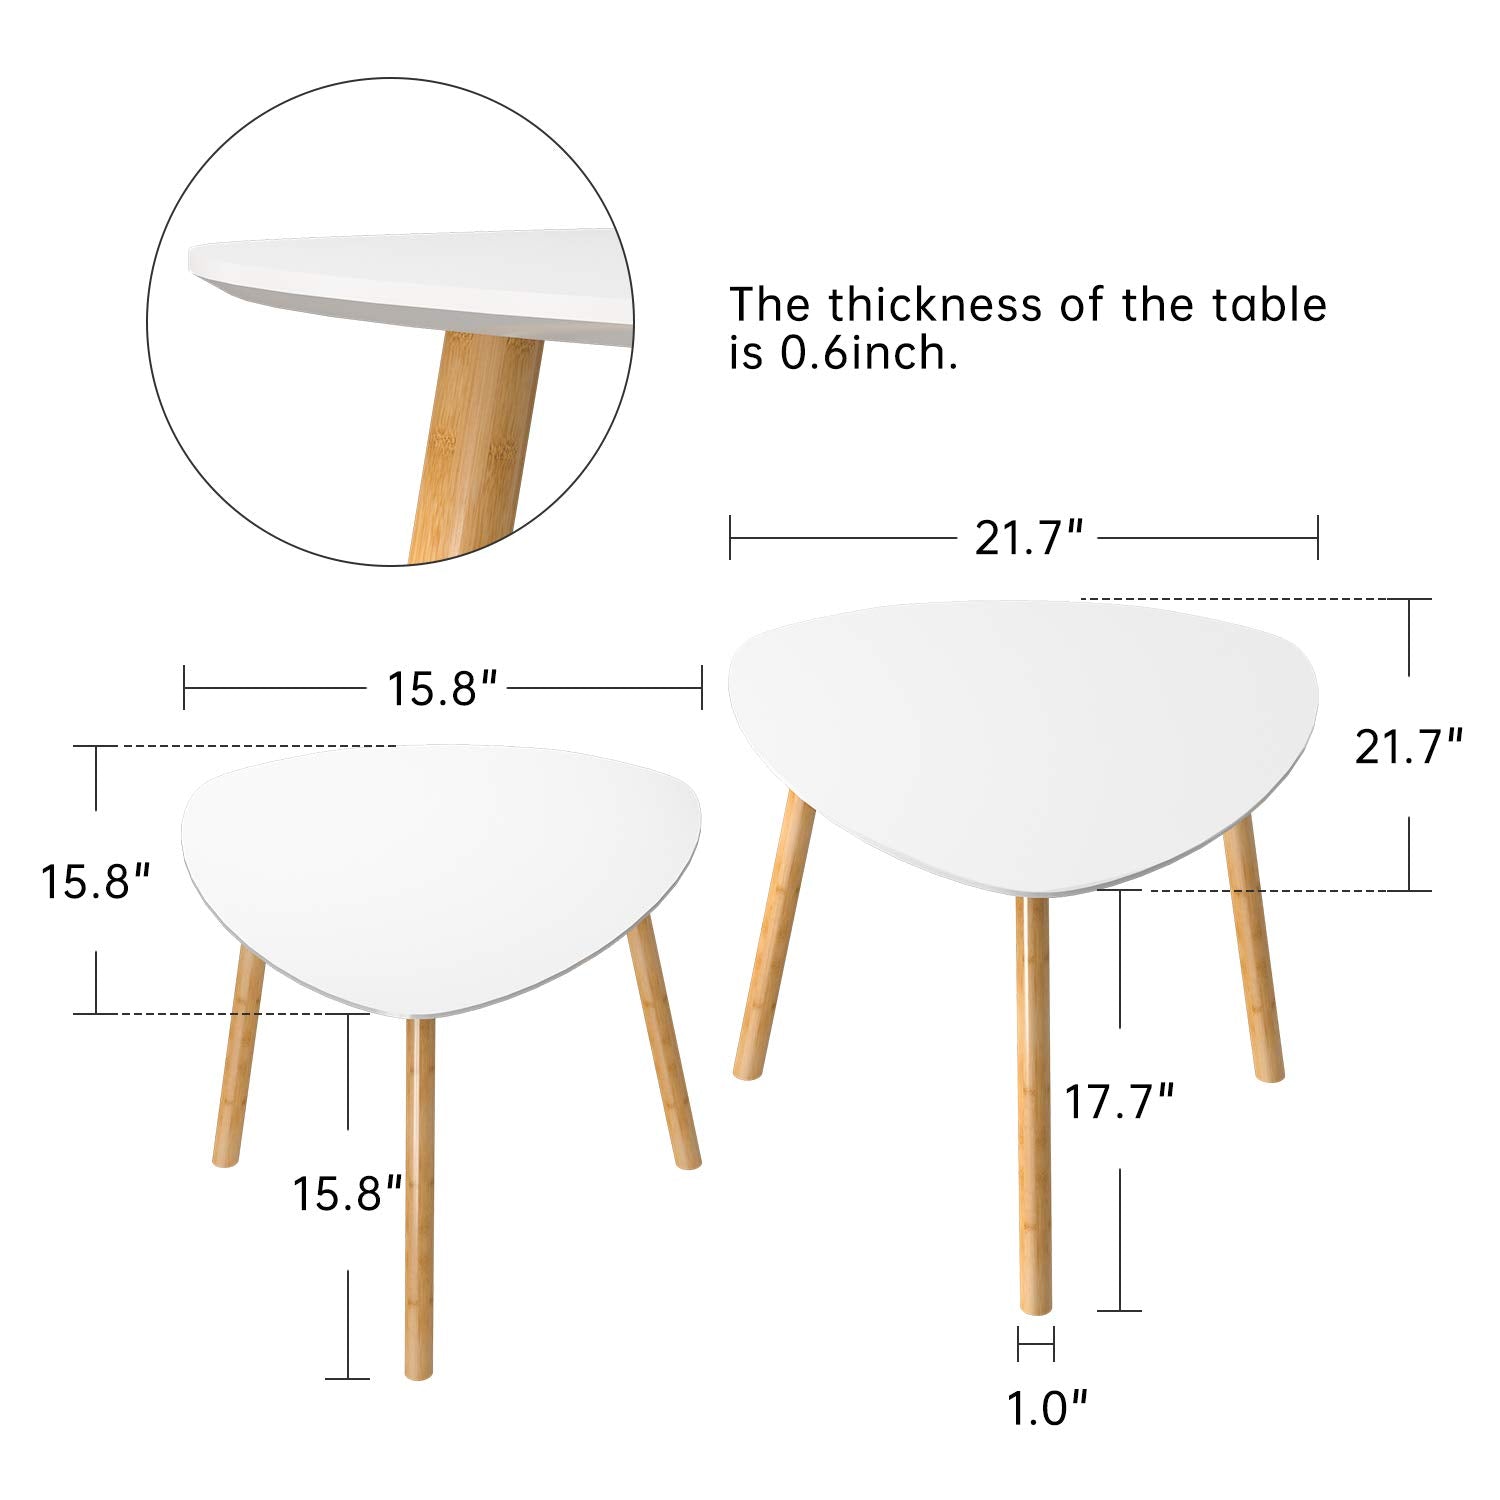 Nest of Tables: Modern Minimalist Side Table for Living Room